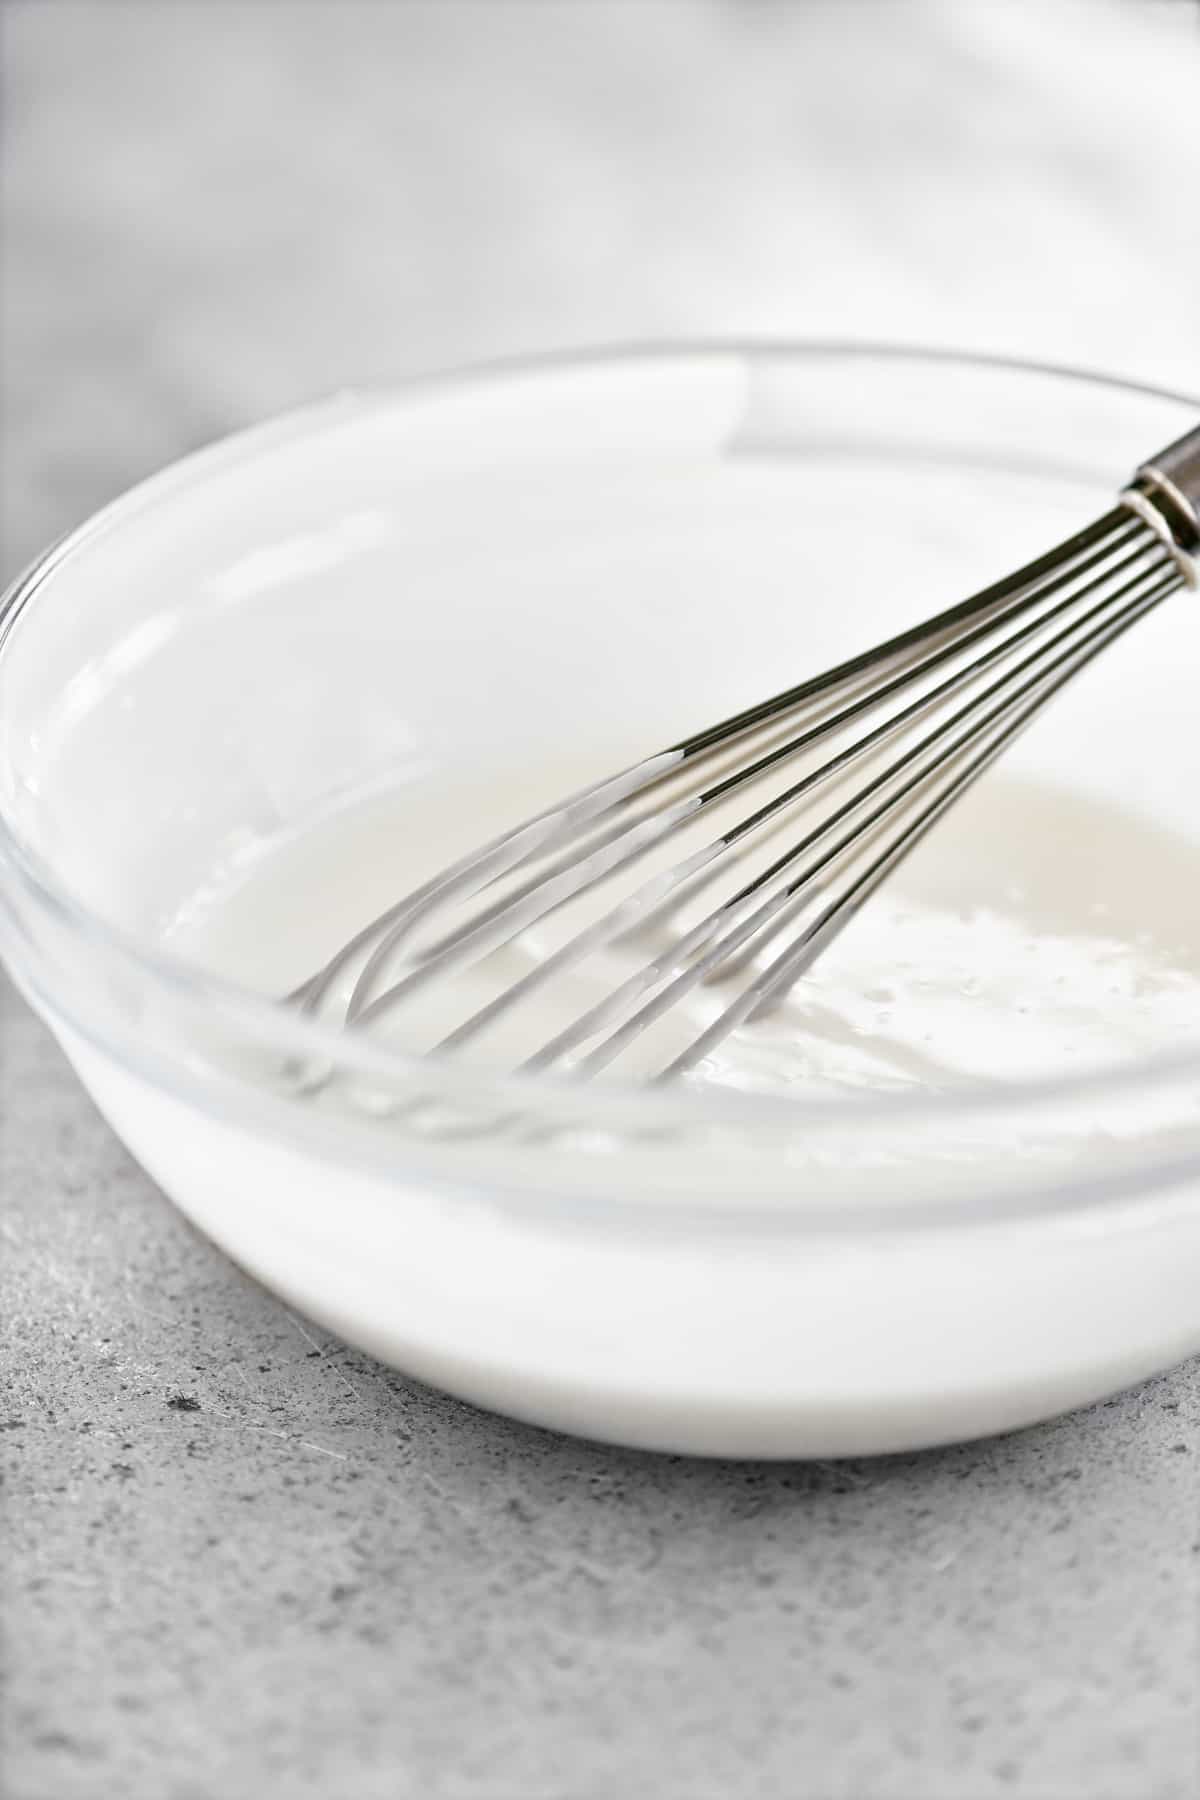 a whisk in a bowl of white glaze